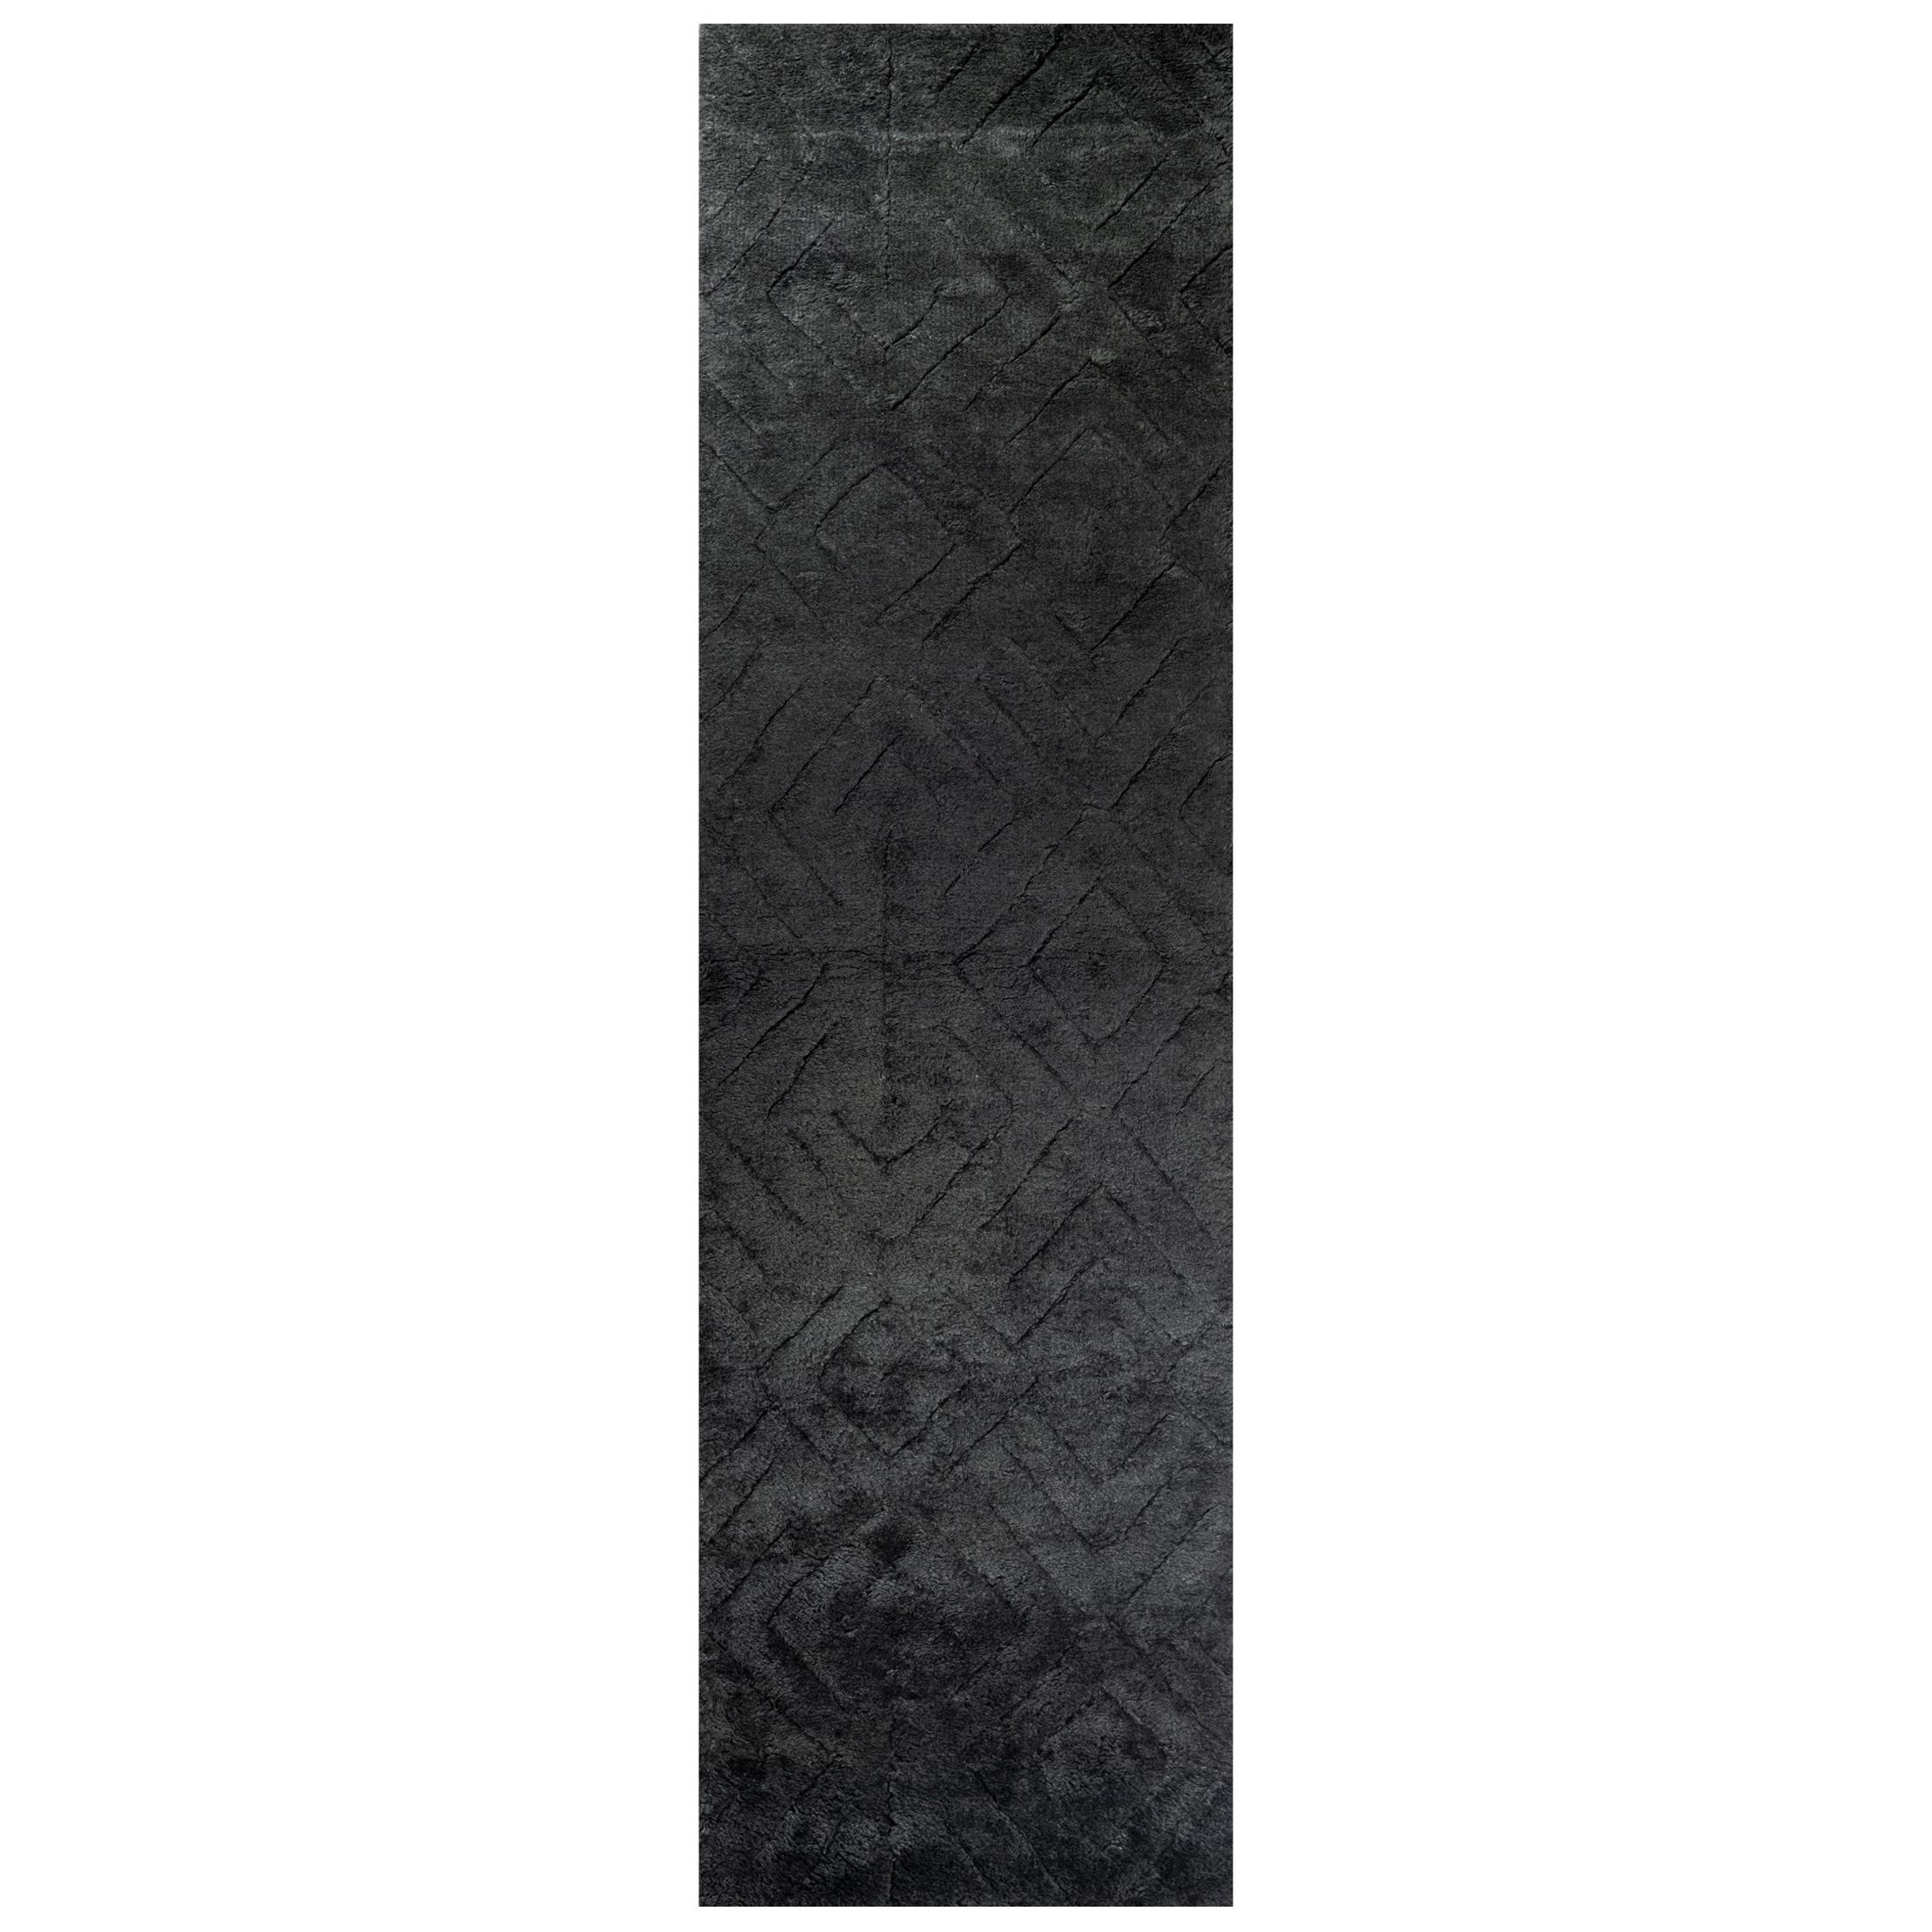 For Sale: Black (Charcoal) Ben Soleimani Cava Runner Rug– Moroccan Hand-knotted Ultra-plush Charcoal